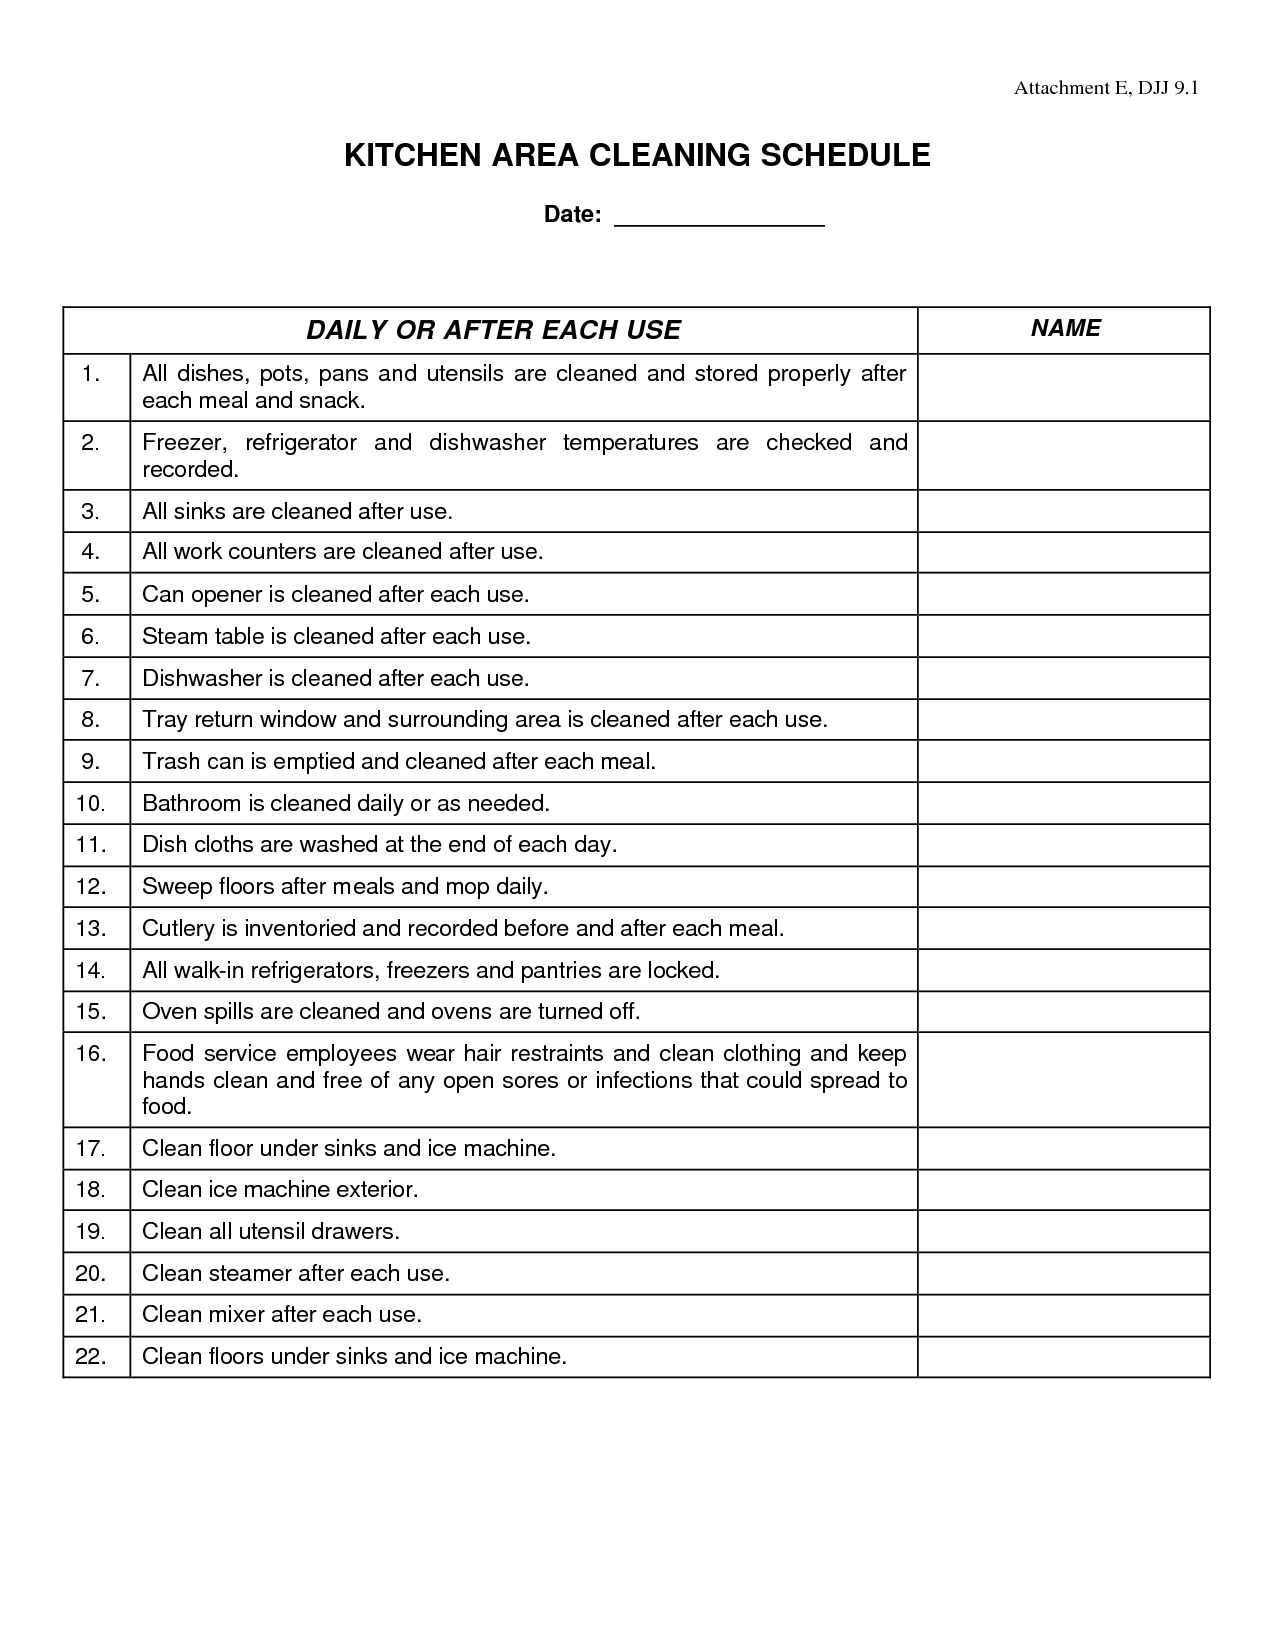 commercial kitchen cleaning schedule template Google Search 